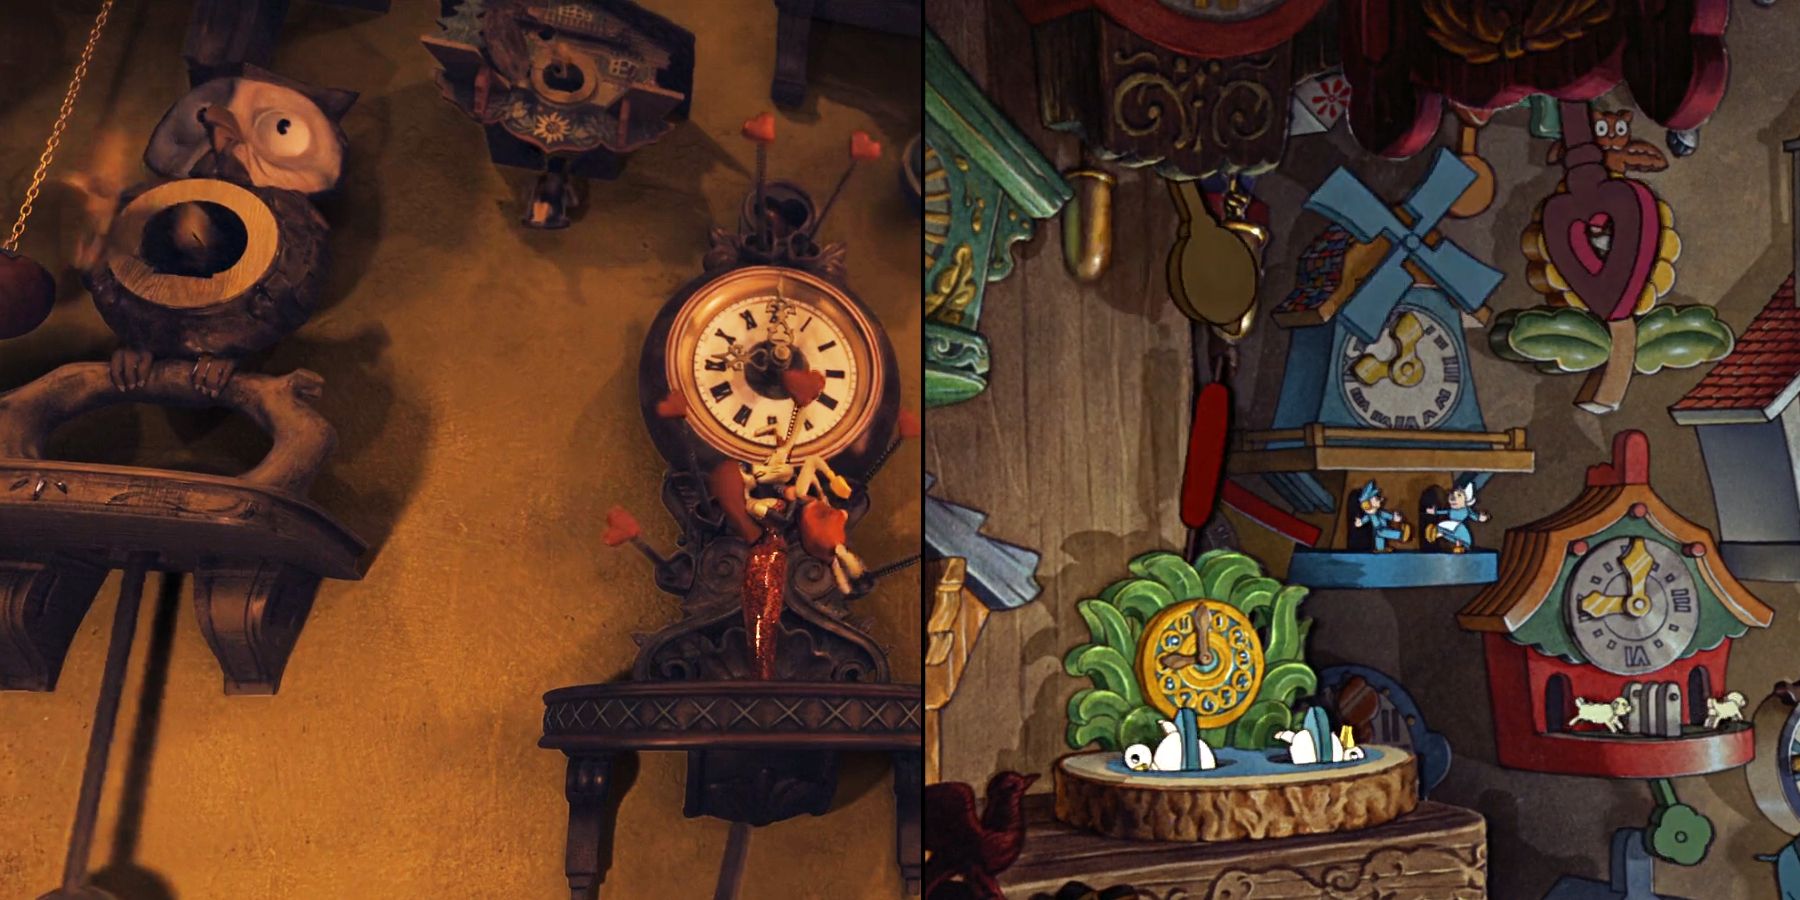 Disney easter egg clocks in the live-action Pinocchio remake